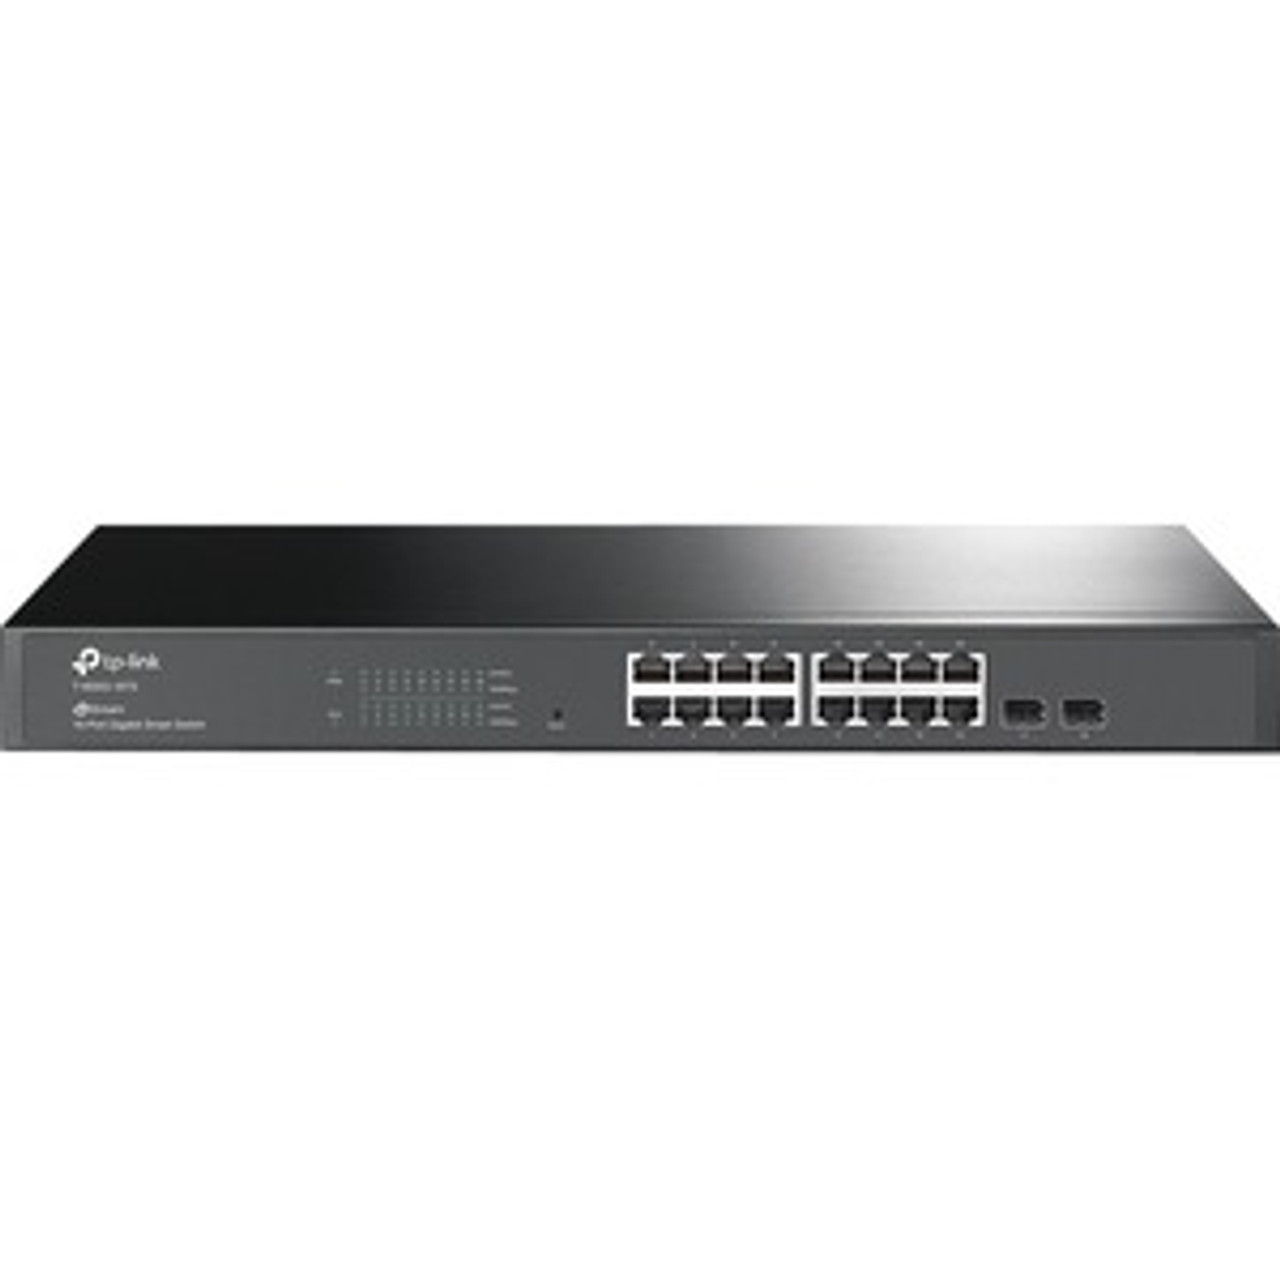 T1600G-18TS TP-Link JetStream16-Port Gigabit Smart Switch with 2 SFP Slots - 16 Ports - Manageable - 4 Layer Supported - Modular - 2 SFP Slots - Twisted Pair,